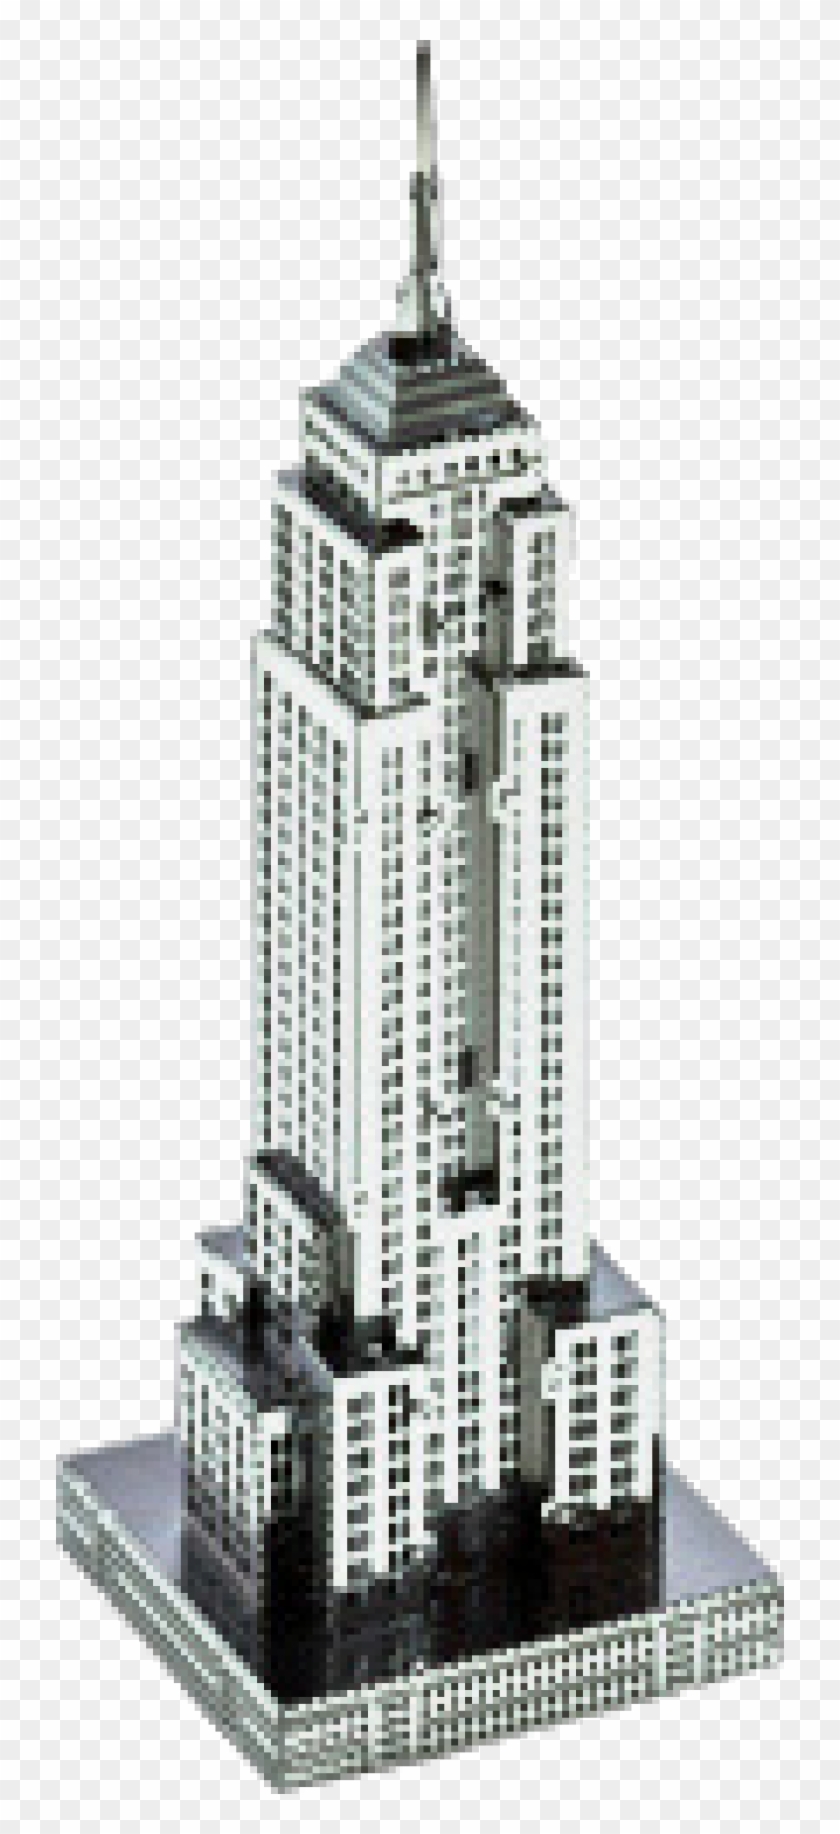 Image Of Laser Cut Empire State Building - Empire State Building Clipart #109923